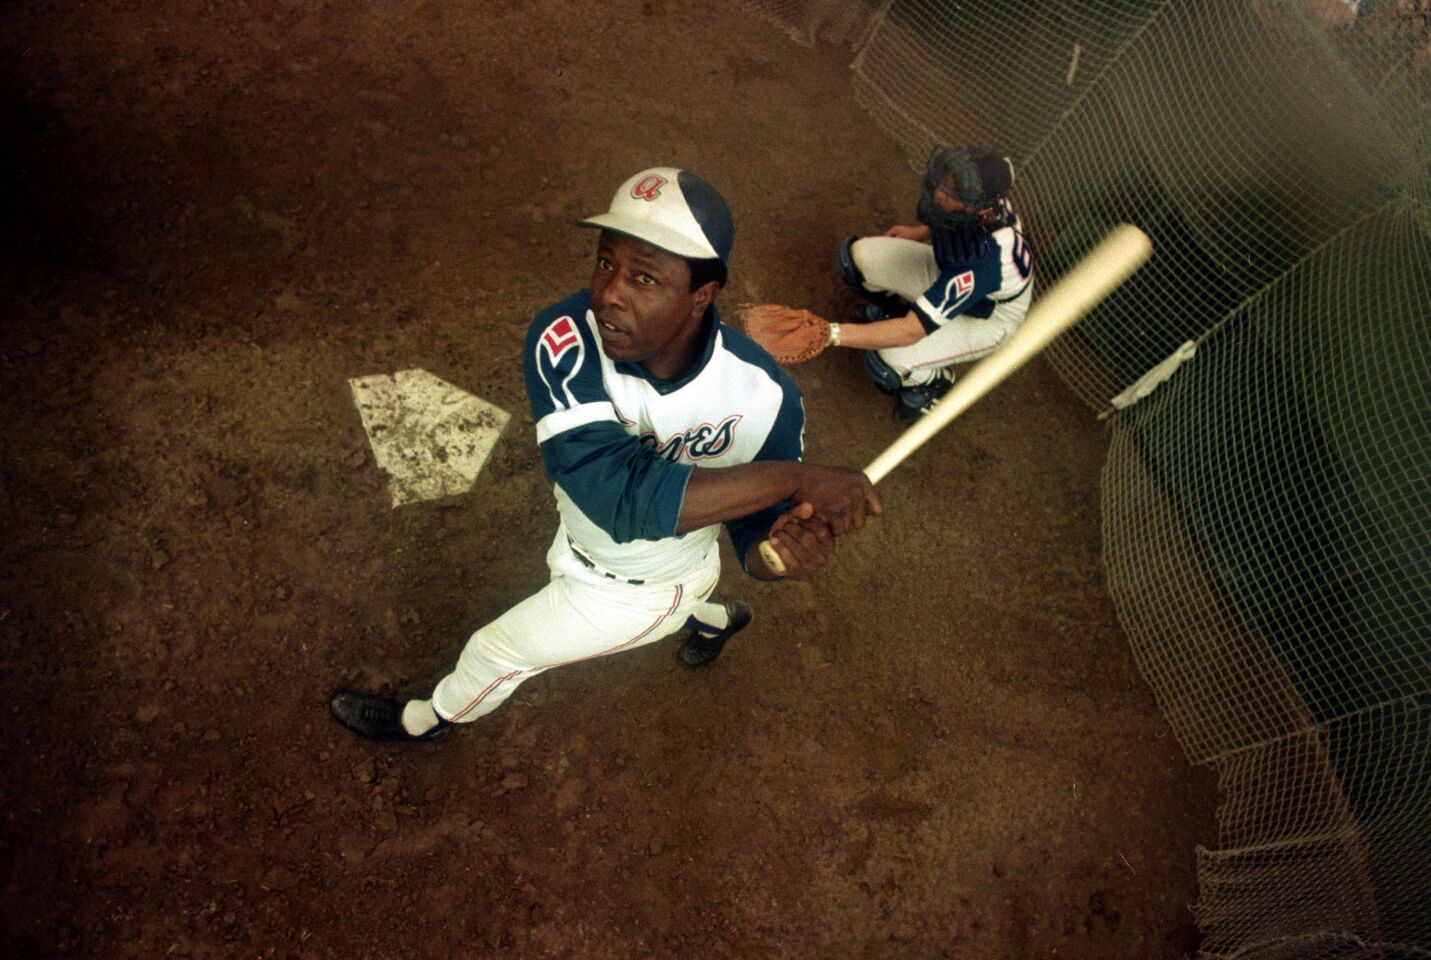 Atlanta Braves outfielder Hank Aaron swings a bat at home plate during spring training